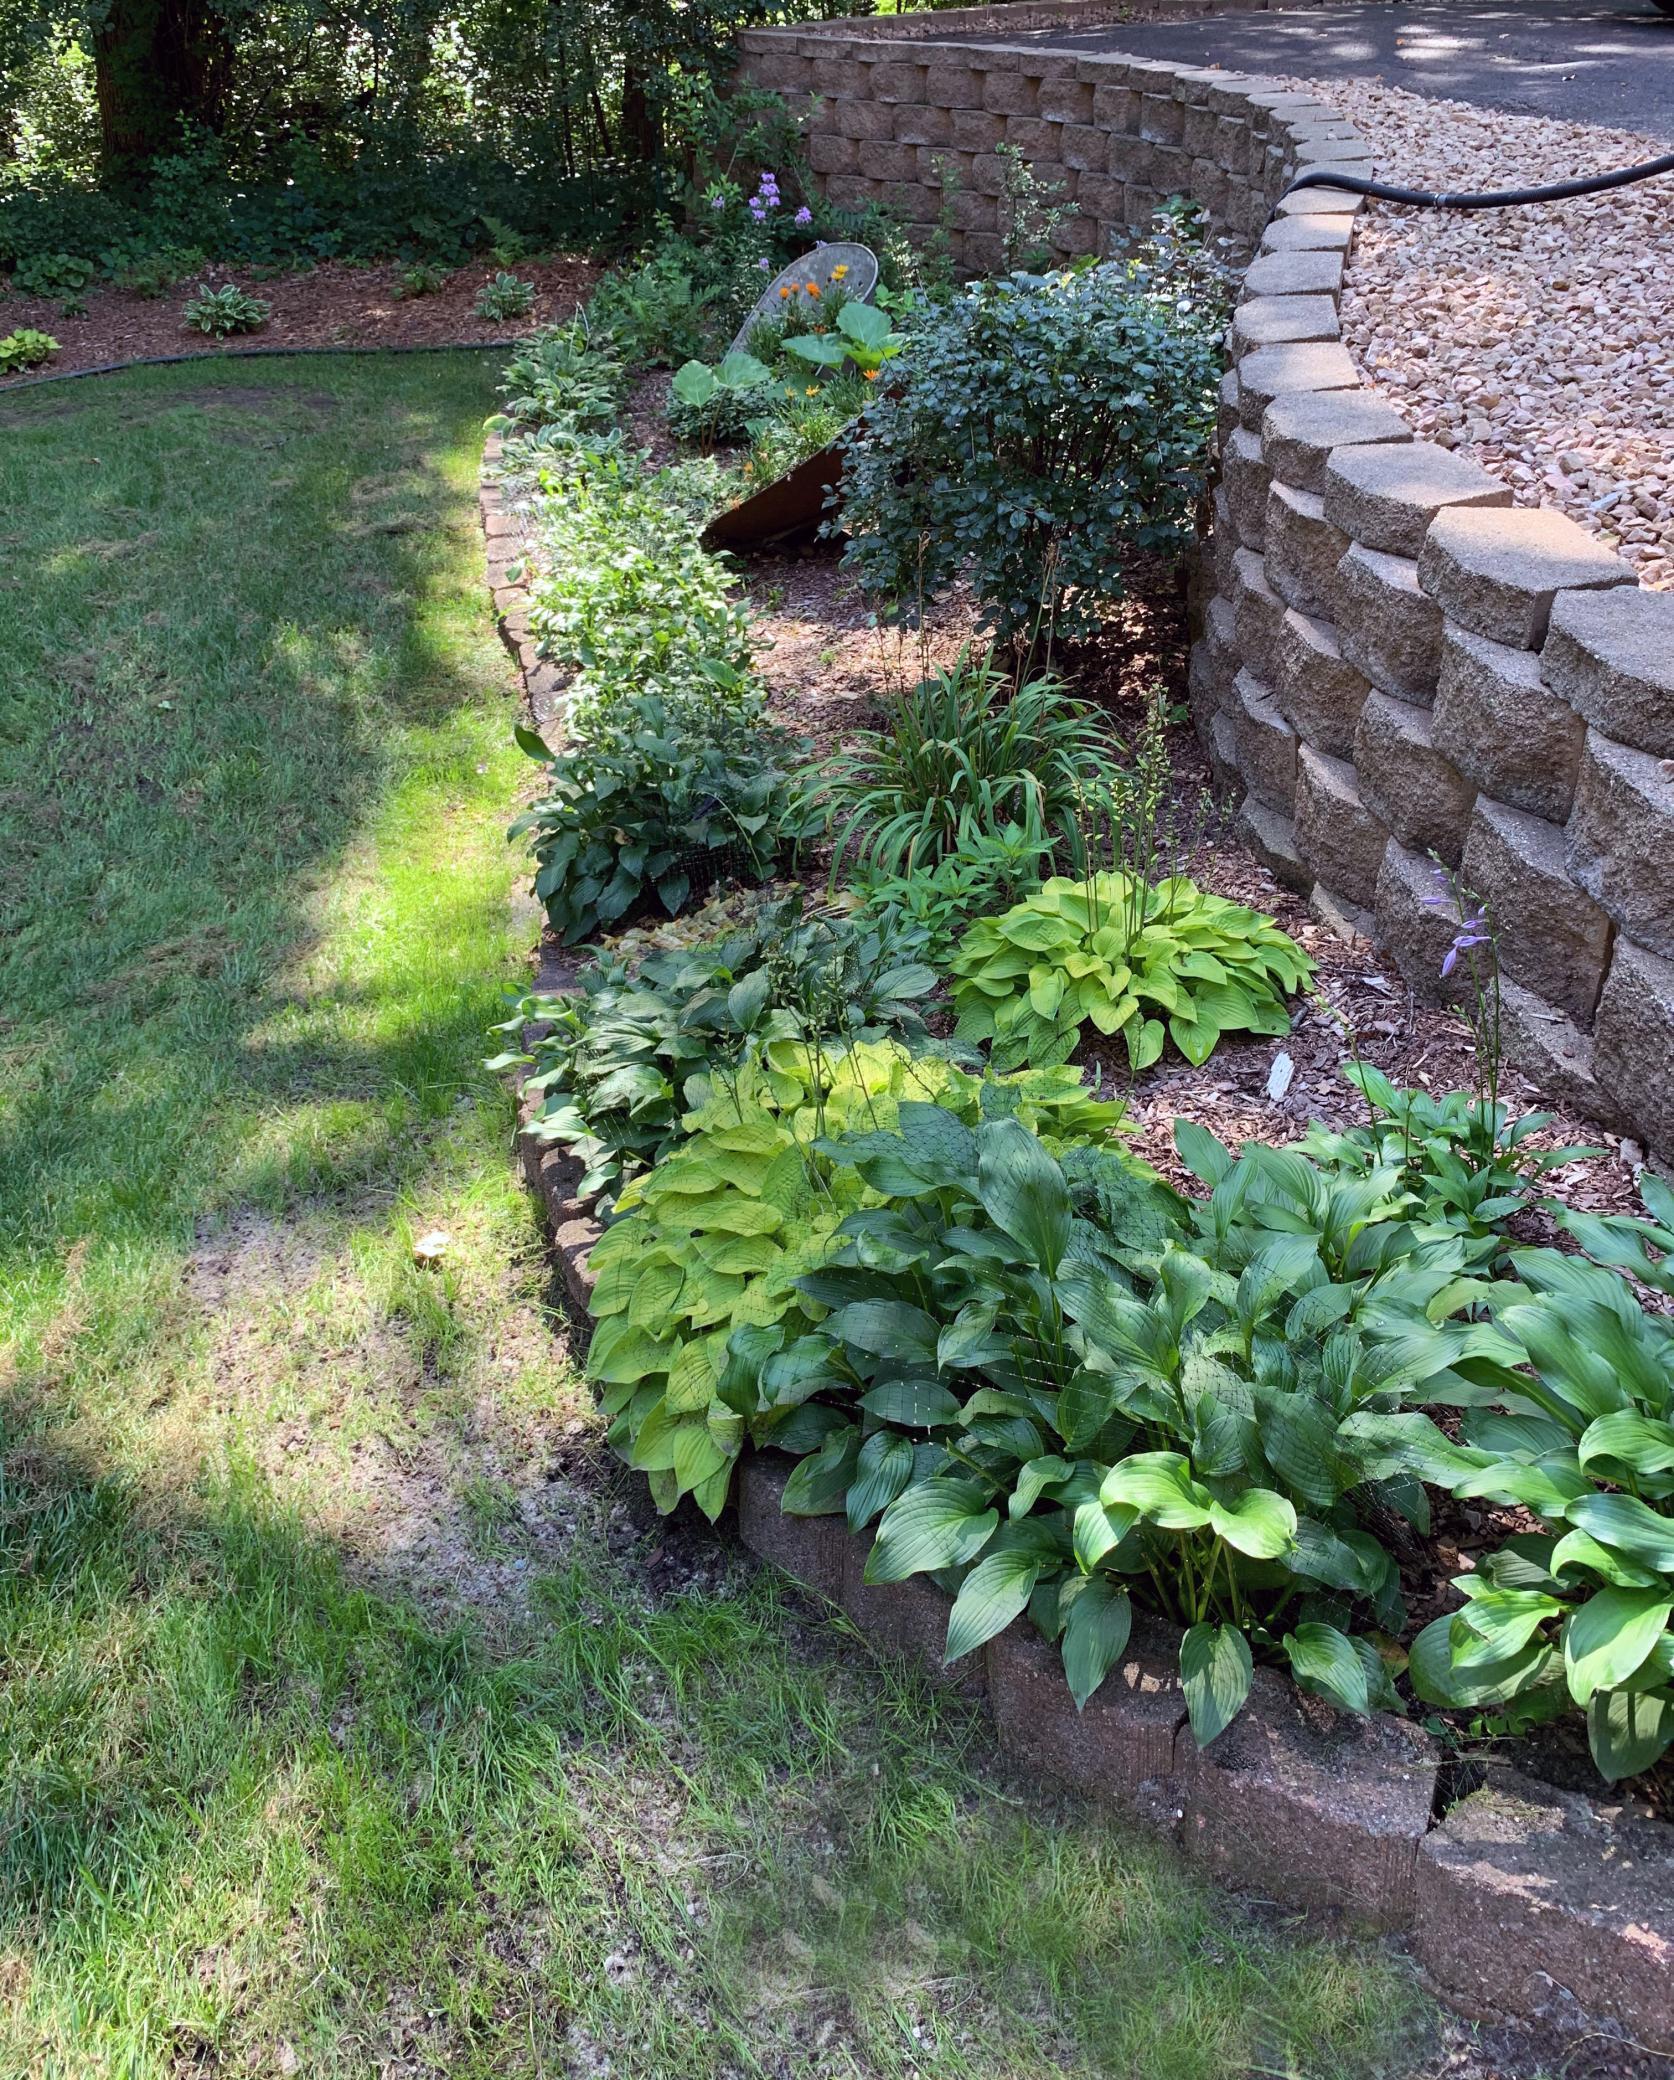 Hostas and other perennials surround the landscaped yard